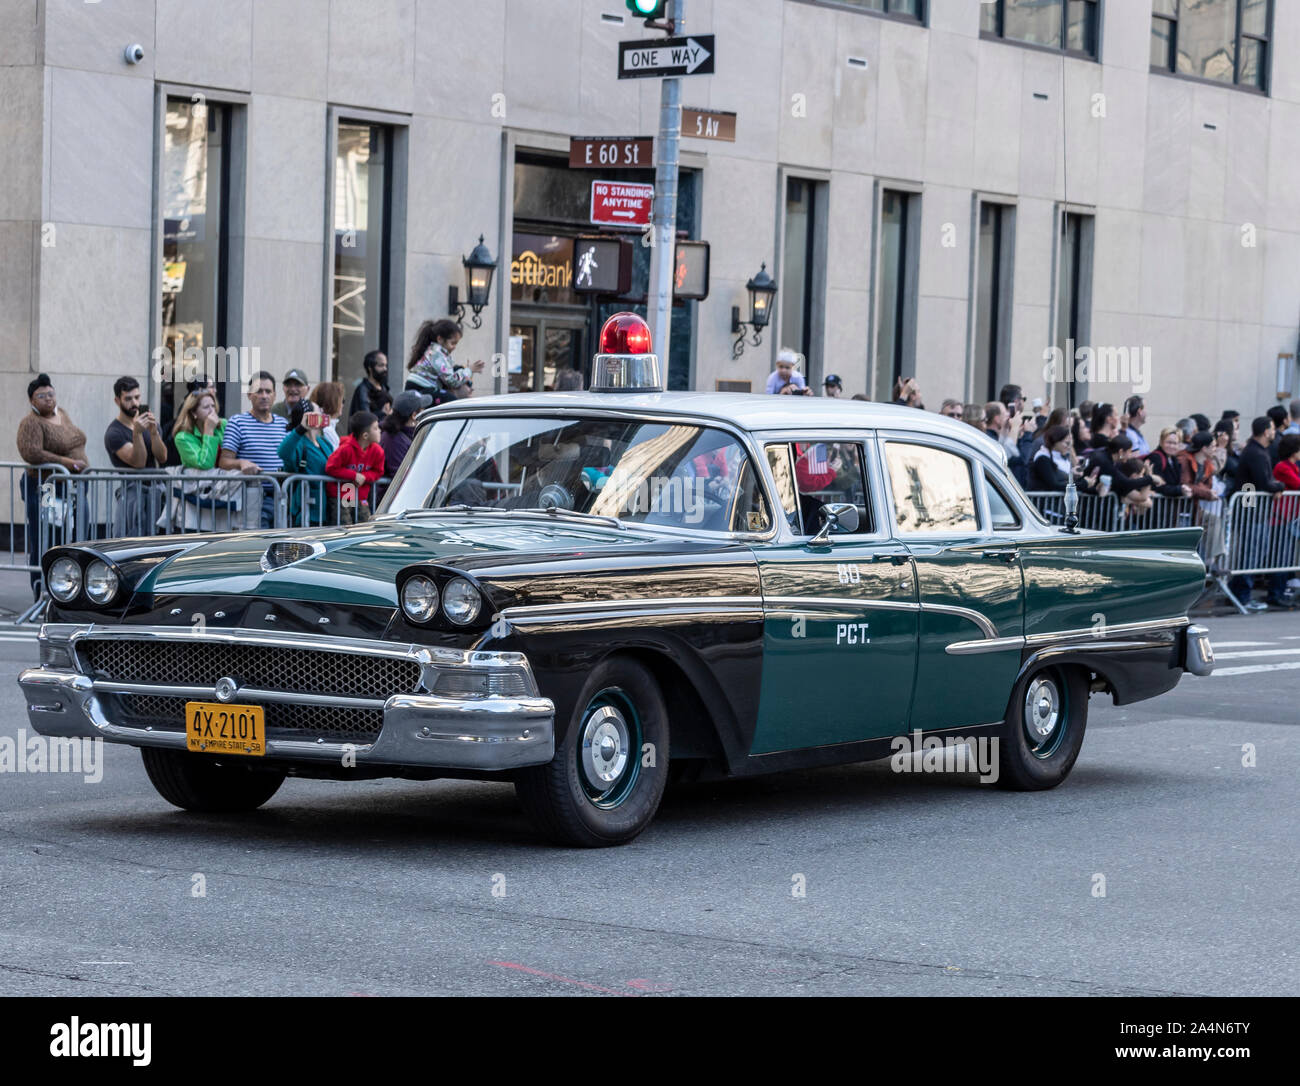 New York, NY, USA - October 14, 2019: Vintage police car moves along Fifth Avenue during 75th Annual Columbus Day Parade, Manhattan. The annual Columb Stock Photo